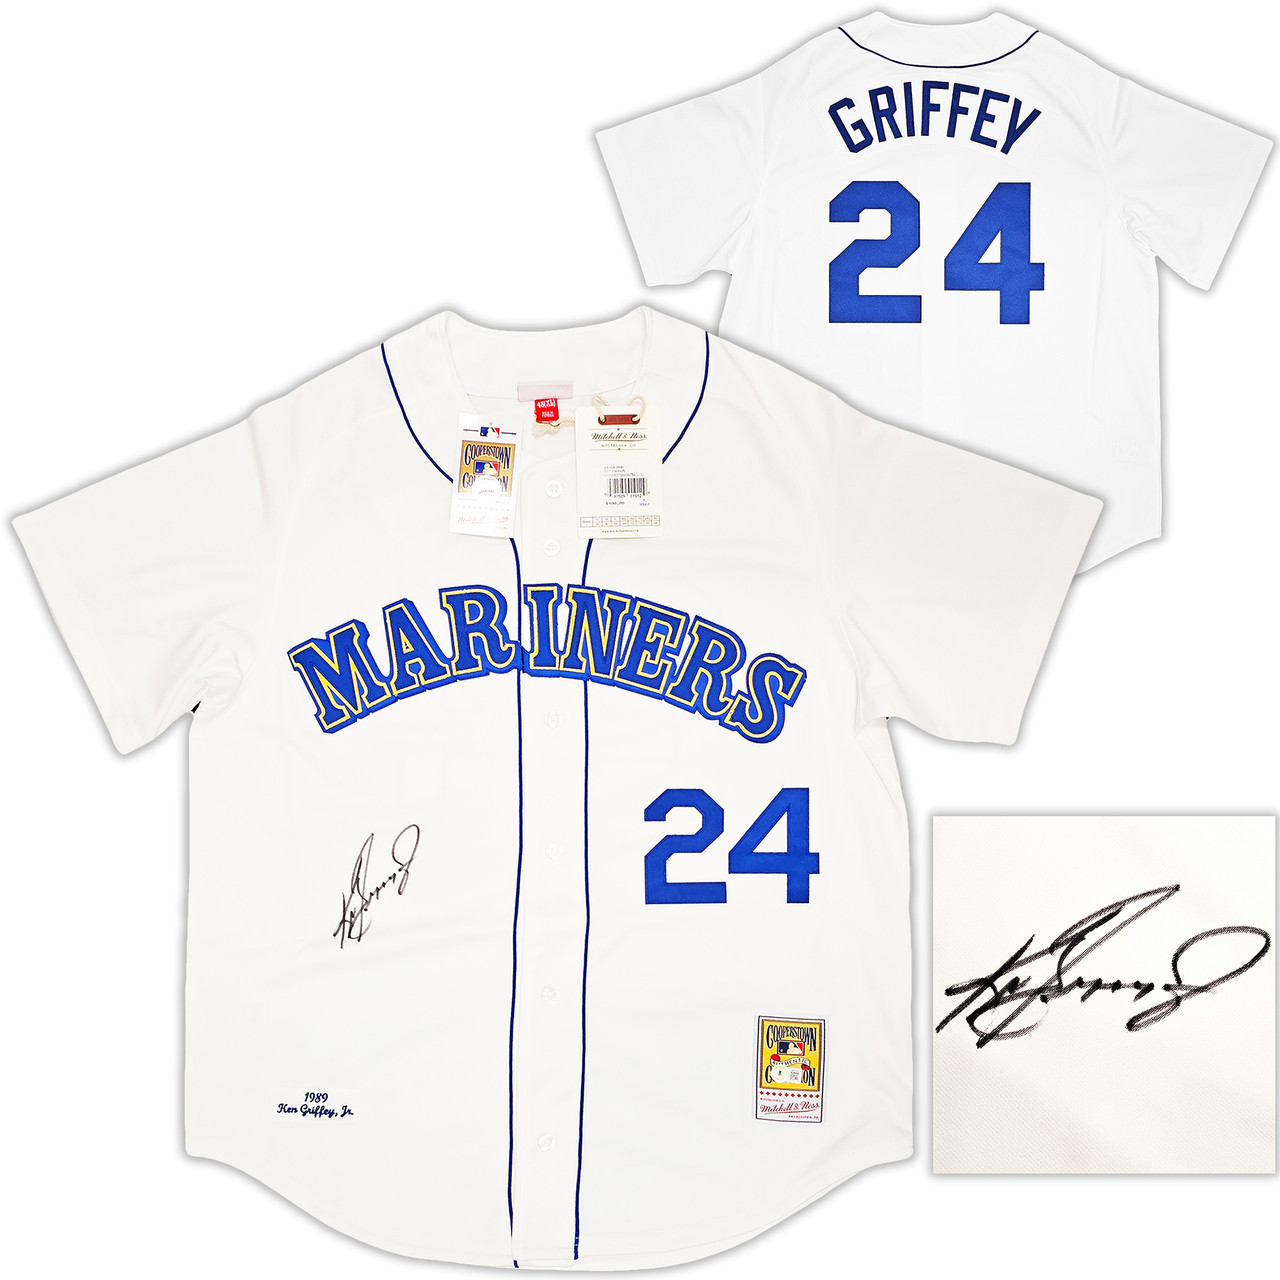 mariners authentic jersey